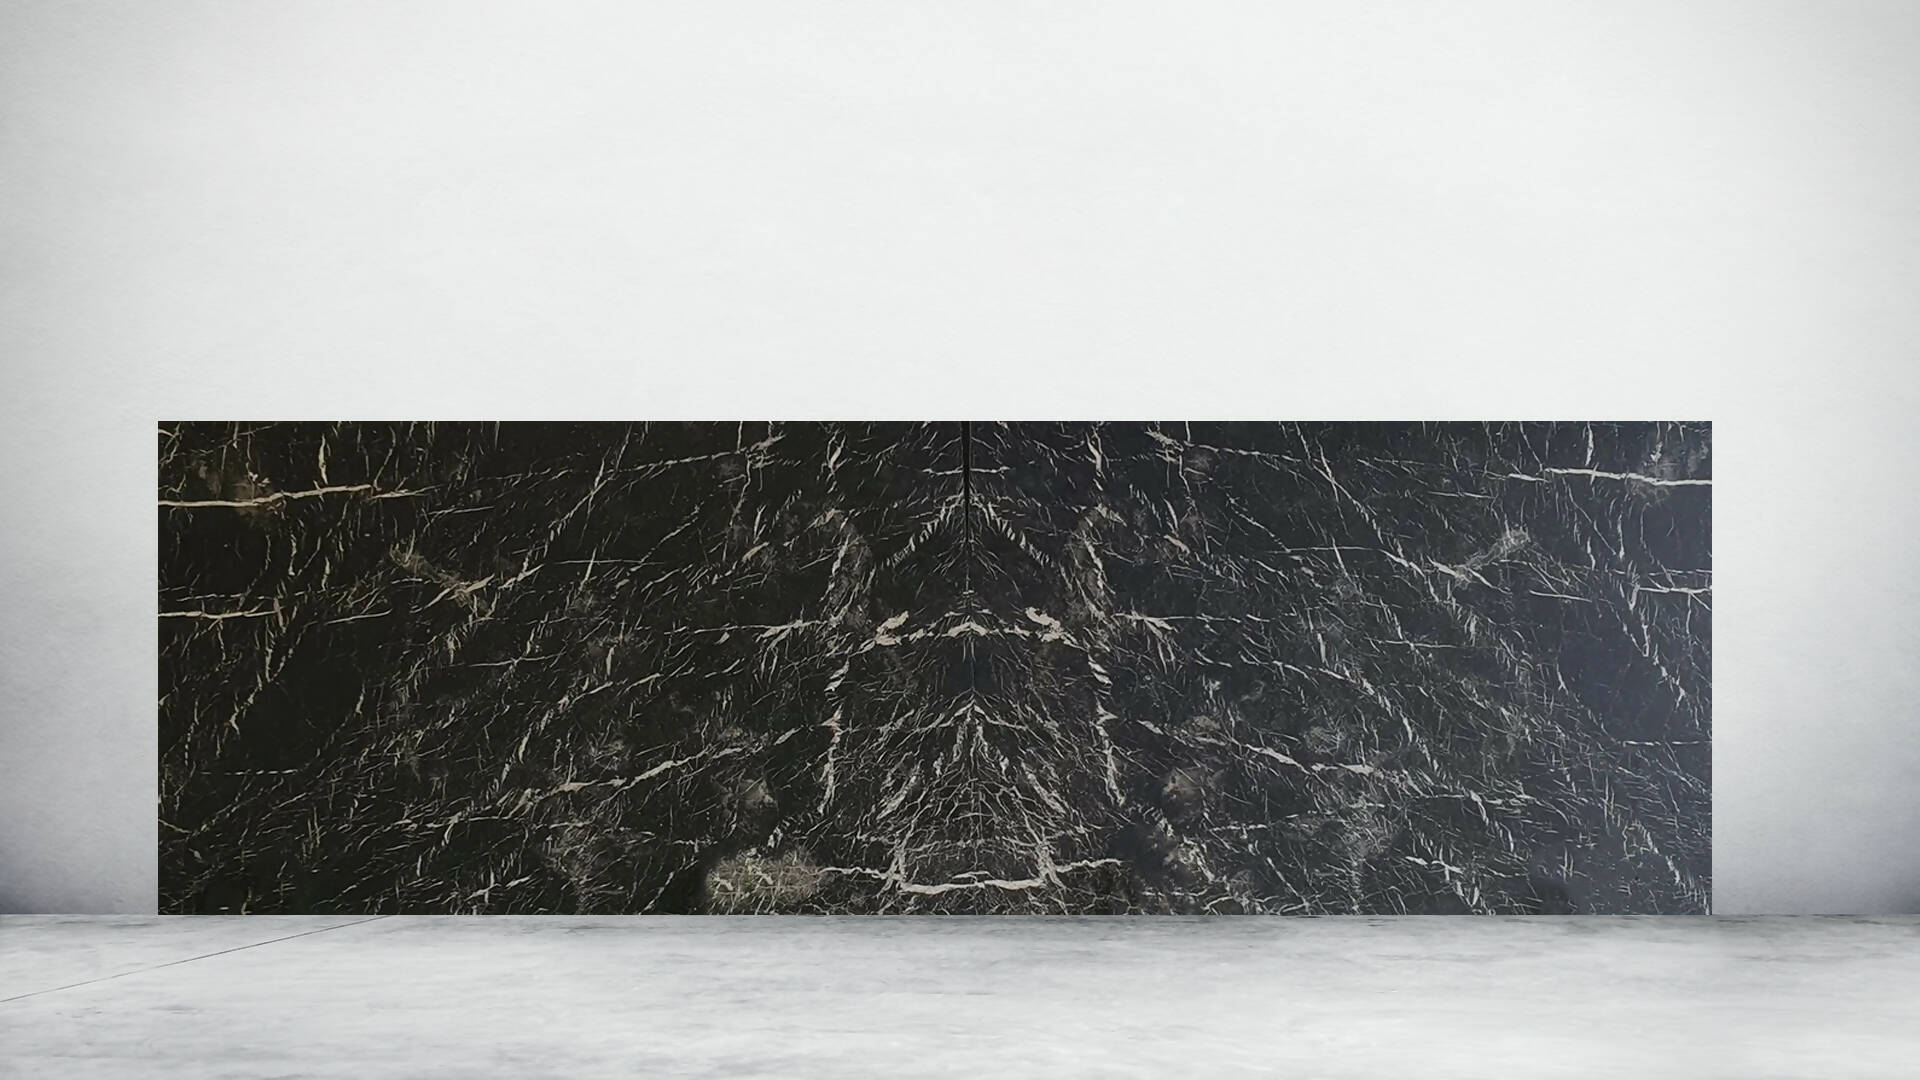 NERO MARQUINA BOOKMATCH MARBLE,Marble,Develli,www.work-tops.com